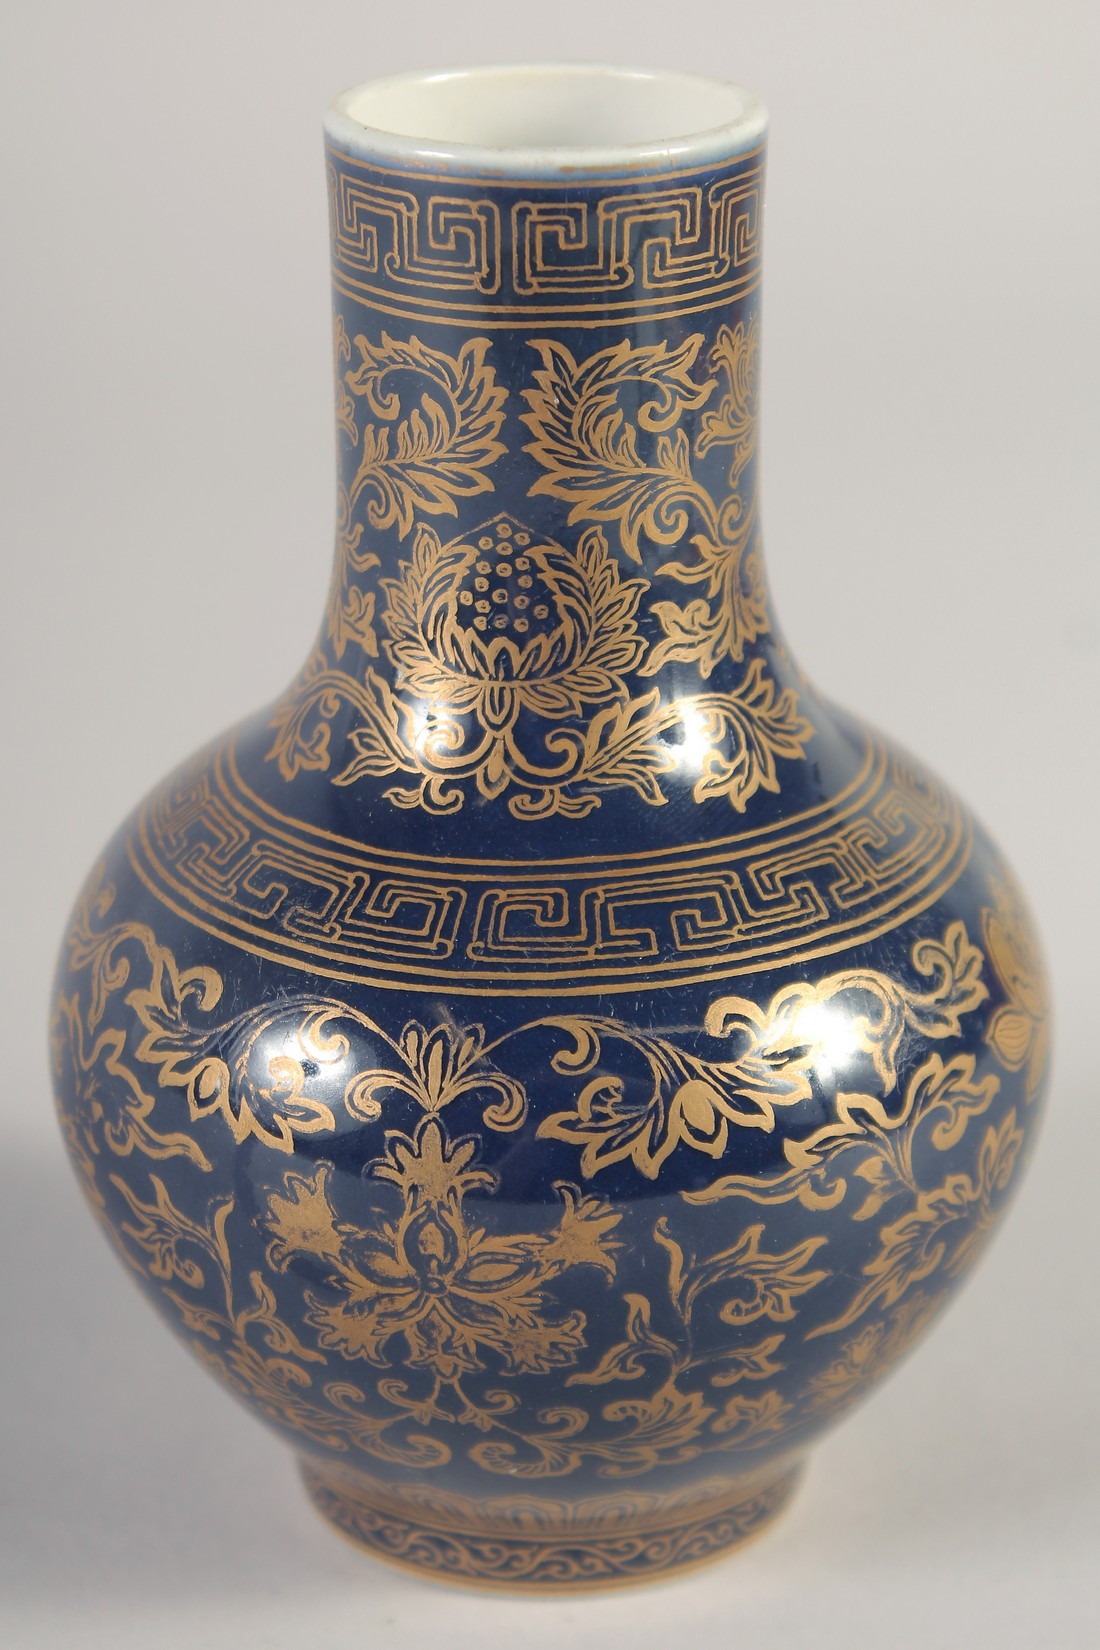 A CHINESE POWDER BLUE VASE, with gilt floral decoration, the base with six-character mark, 13cm